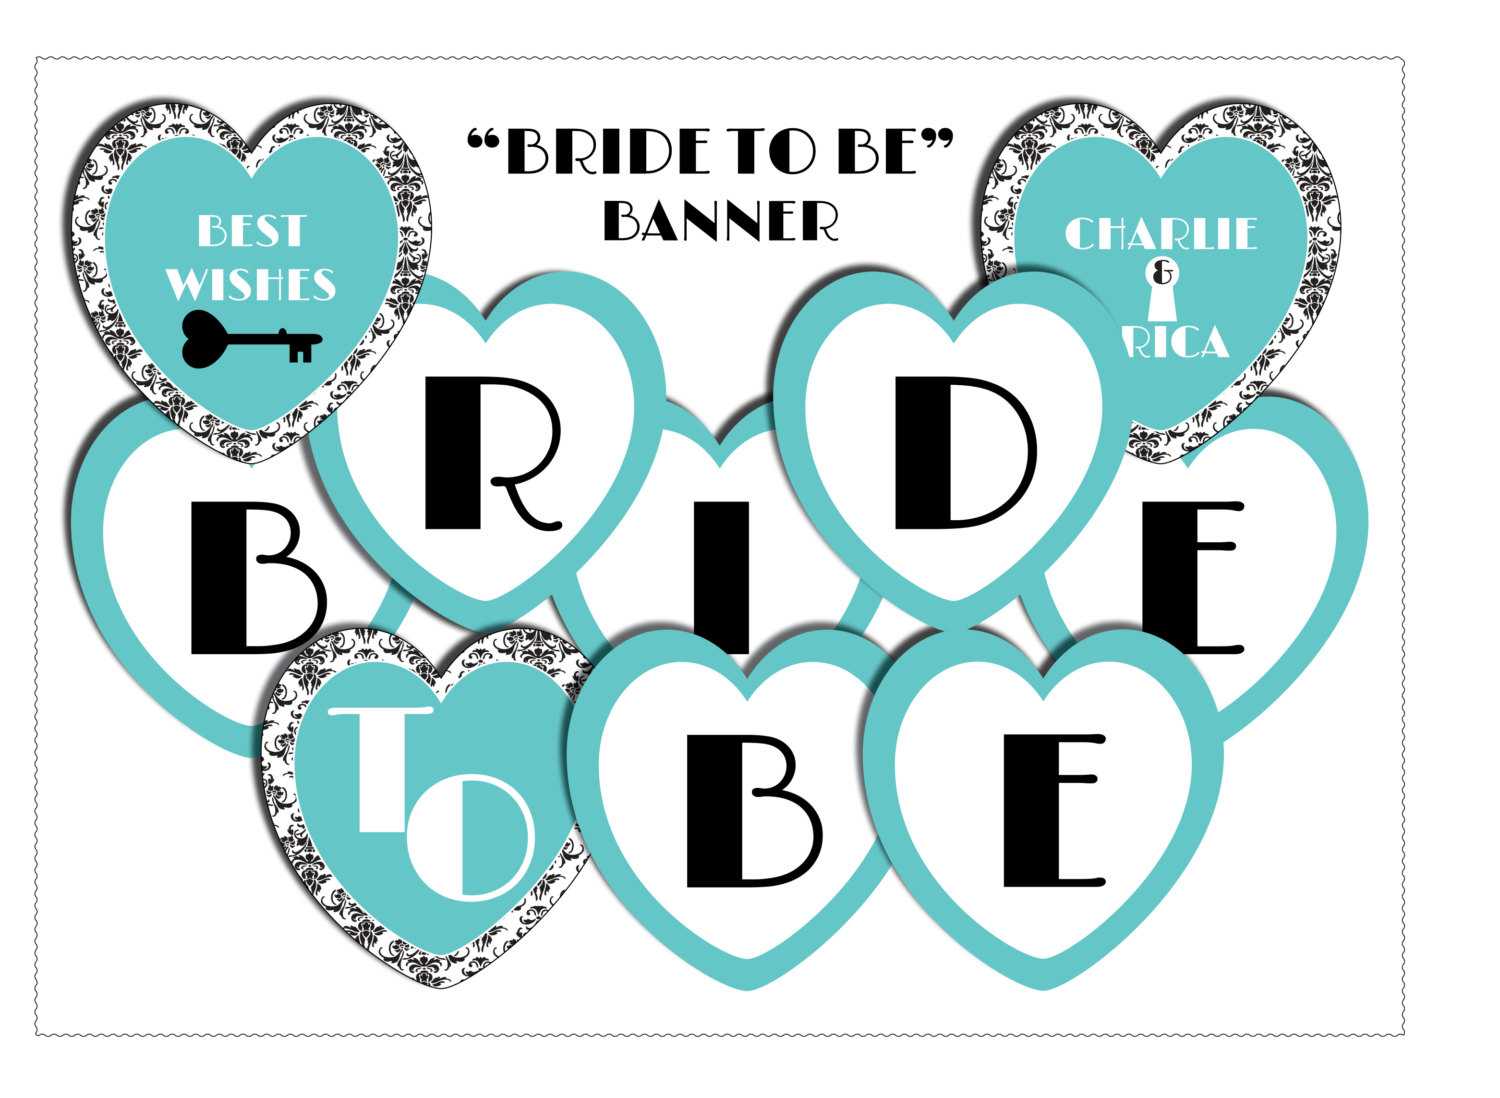 11 Best Photos Of Bride To Be Banner Template - Diy Bridal With Regard To Bridal Shower Banner Template